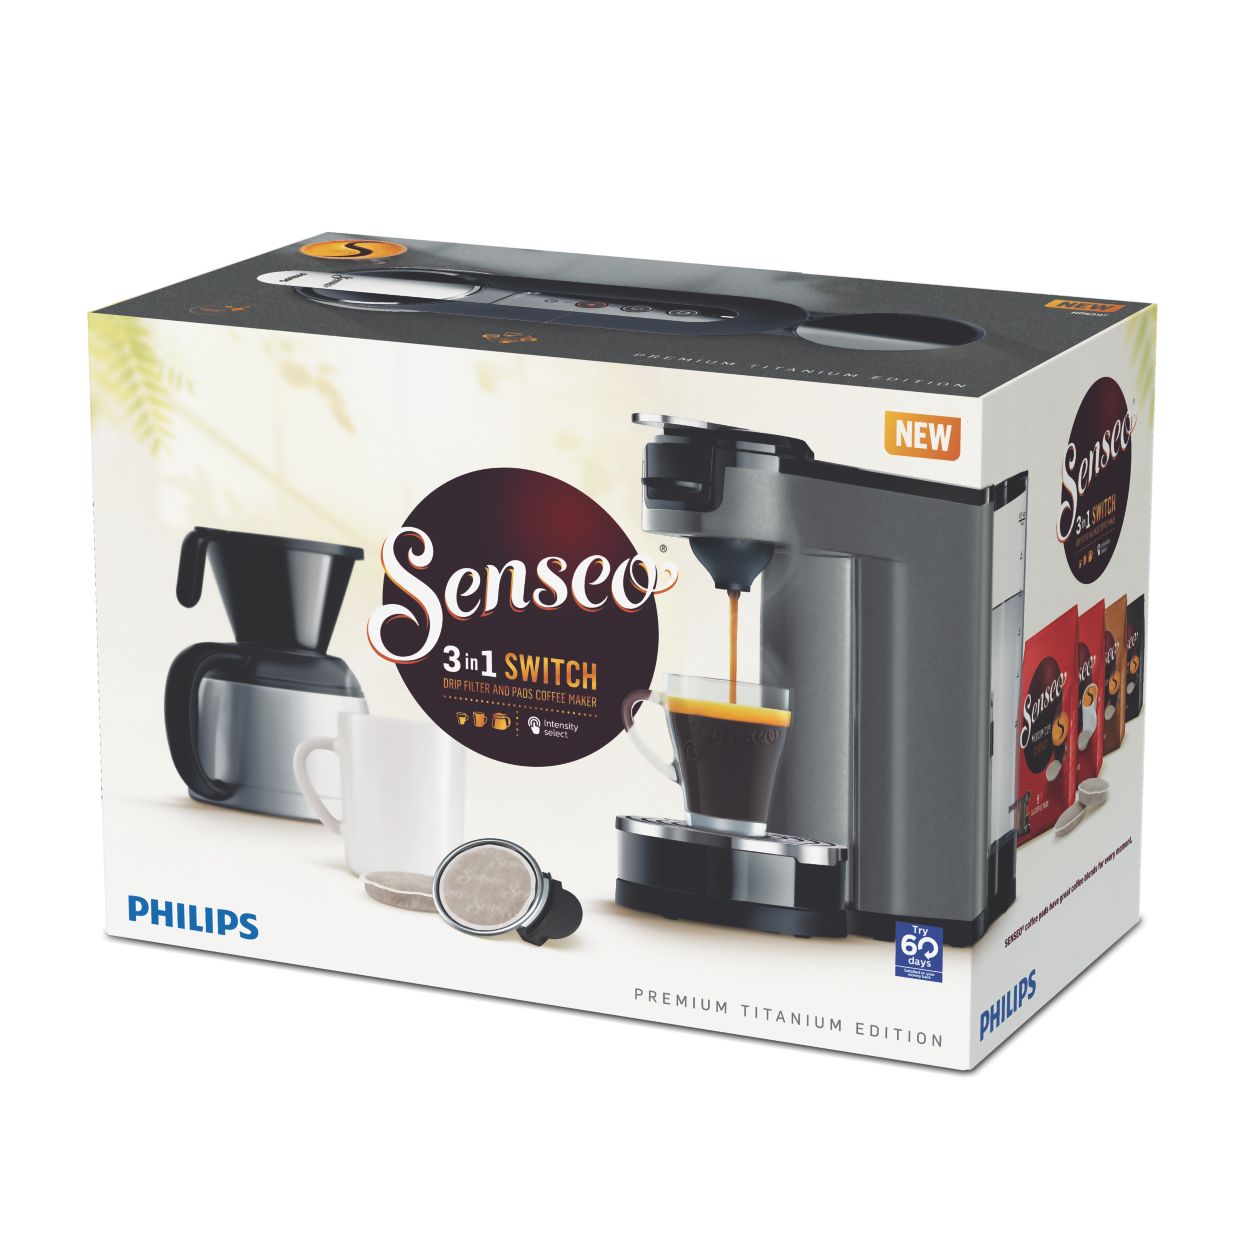 Senseo Switch 3-in-1 - seulement 119,99 € chez